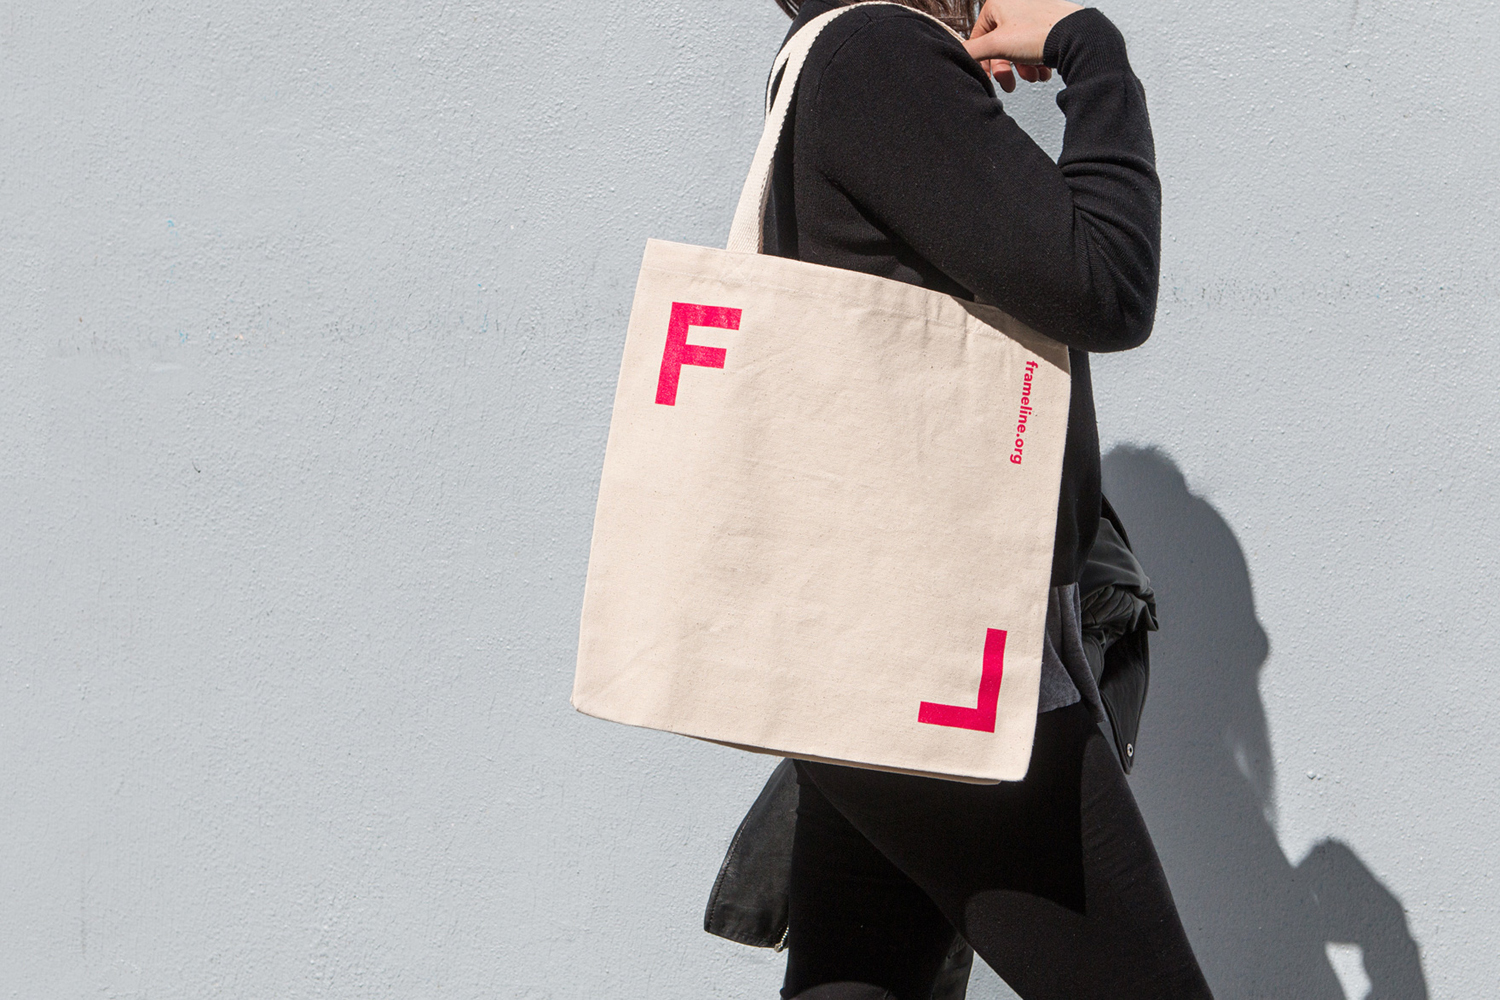 Brand identity and tote bag designed by Mucho for San Francisco based LGBT film festival and nonprofit arts organisation Frameline.